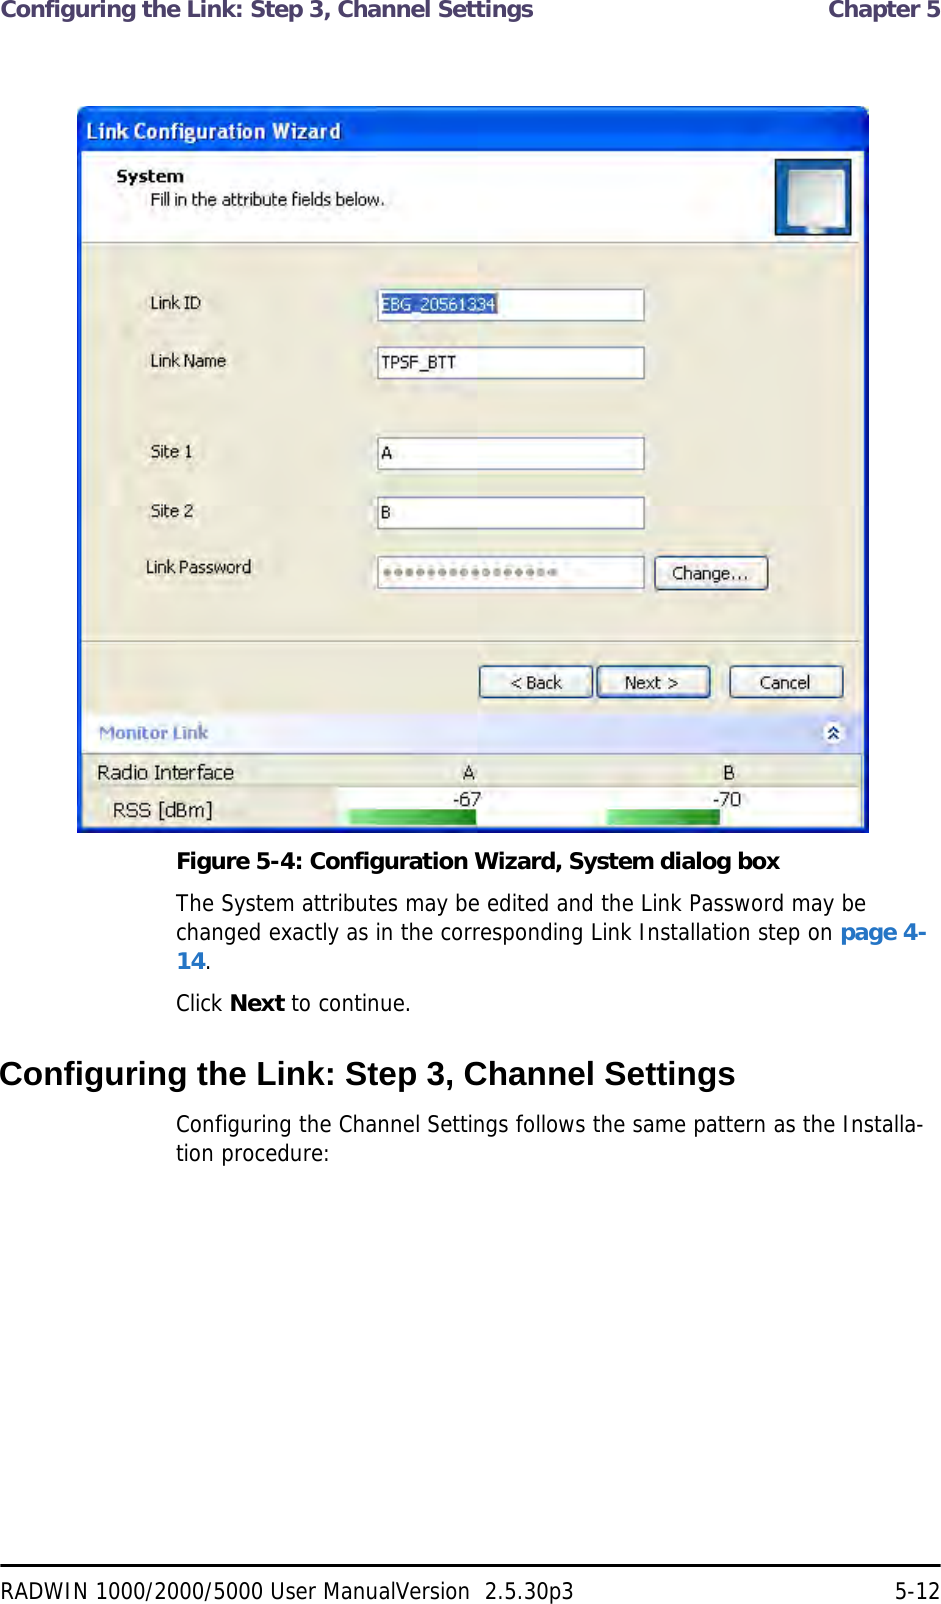 Configuring the Link: Step 3, Channel Settings  Chapter 5RADWIN 1000/2000/5000 User ManualVersion  2.5.30p3 5-12Figure 5-4: Configuration Wizard, System dialog boxThe System attributes may be edited and the Link Password may be changed exactly as in the corresponding Link Installation step on page 4-14.Click Next to continue.Configuring the Link: Step 3, Channel SettingsConfiguring the Channel Settings follows the same pattern as the Installa-tion procedure: